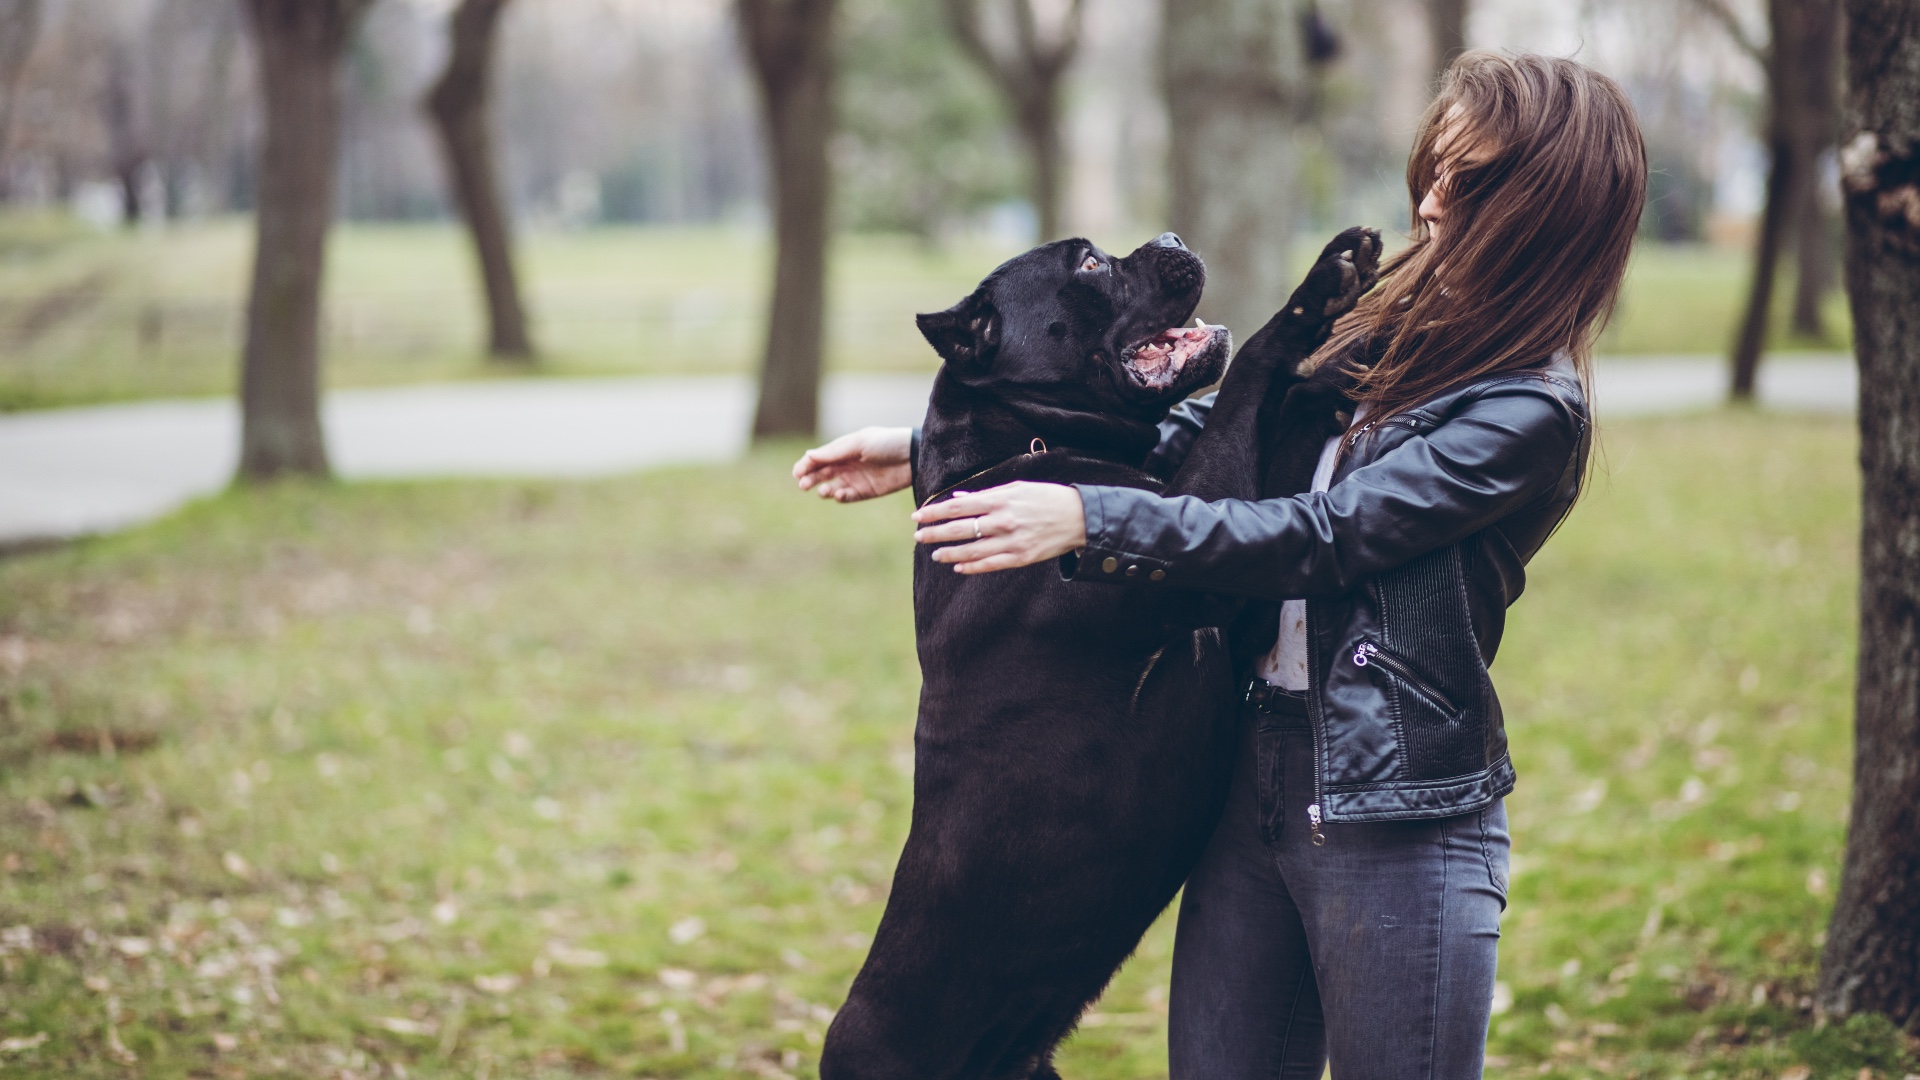 Trainer reveals the biggest mistake we make with dogs when they jump up — and what to do instead